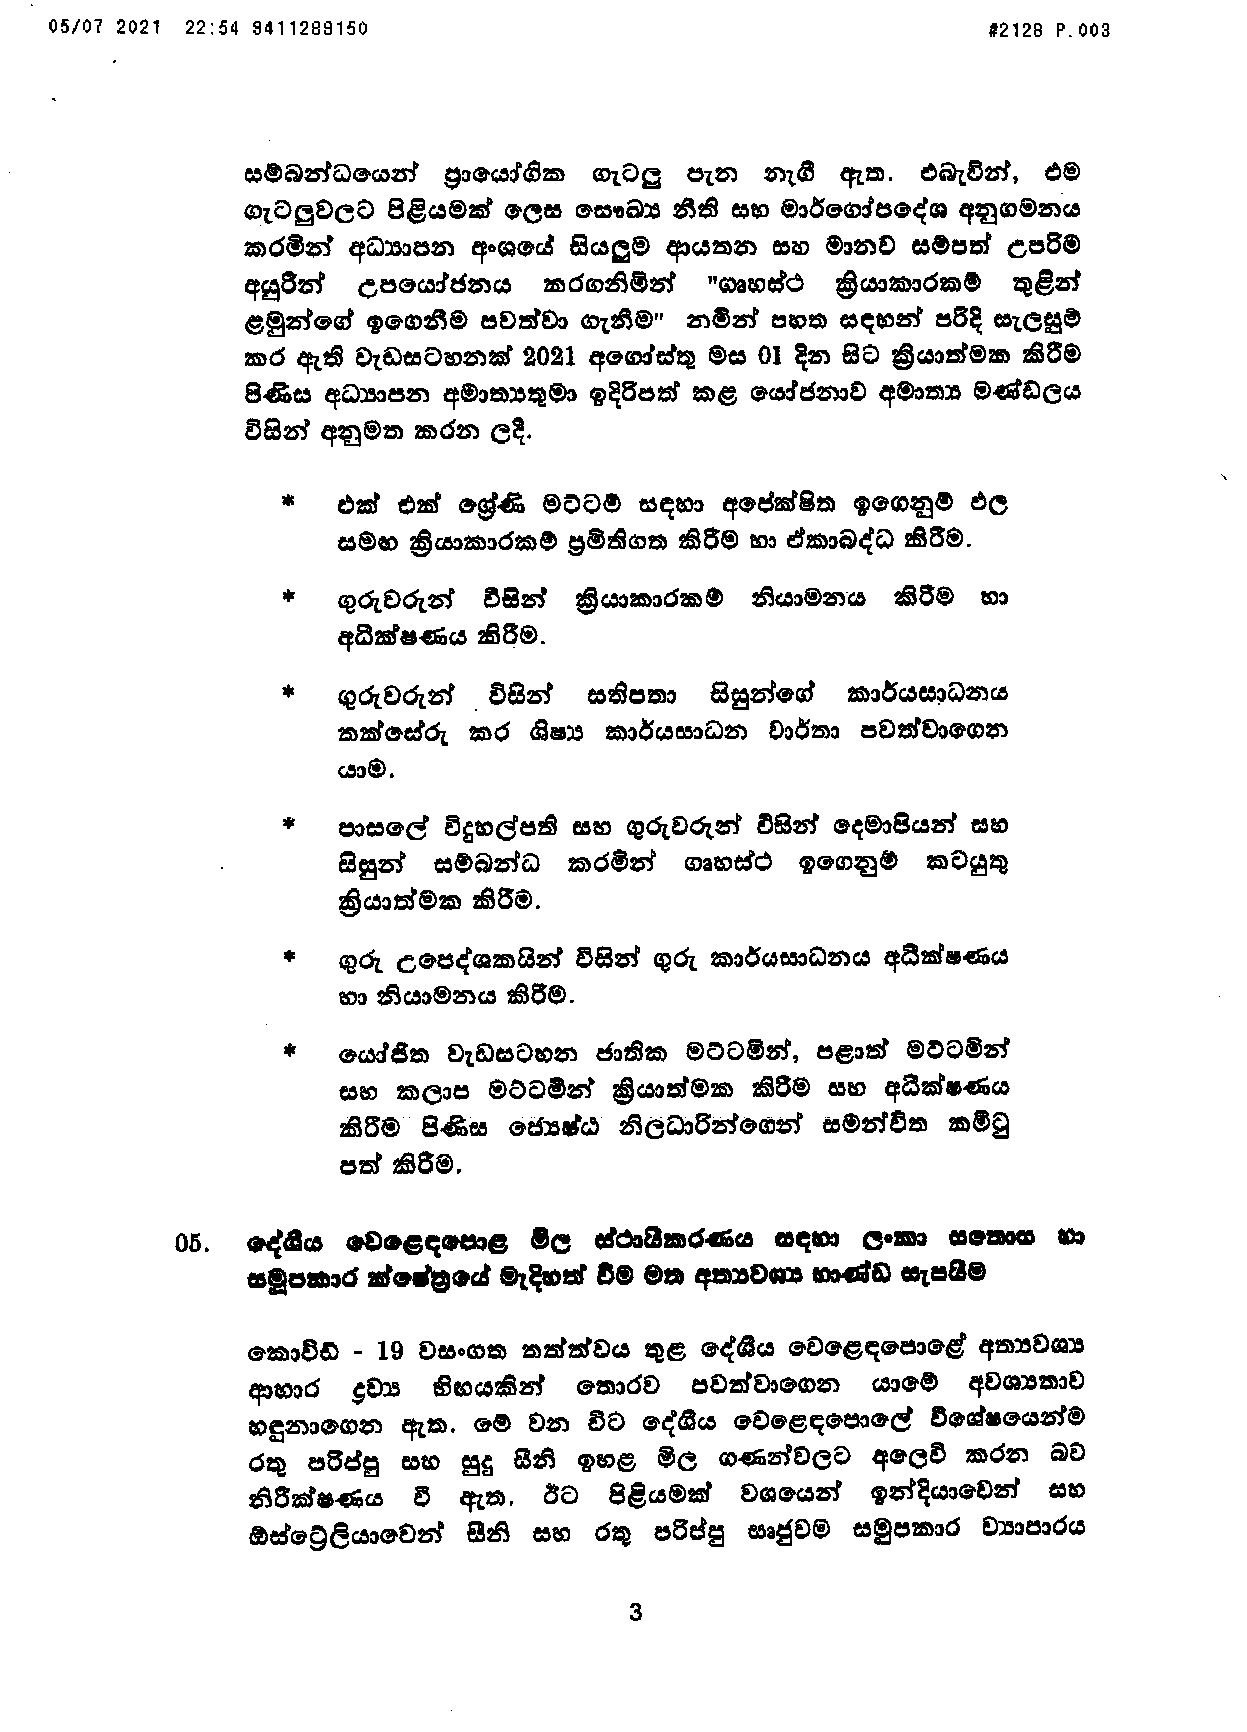 Cabinet Decision on 05.07.2021 page 003